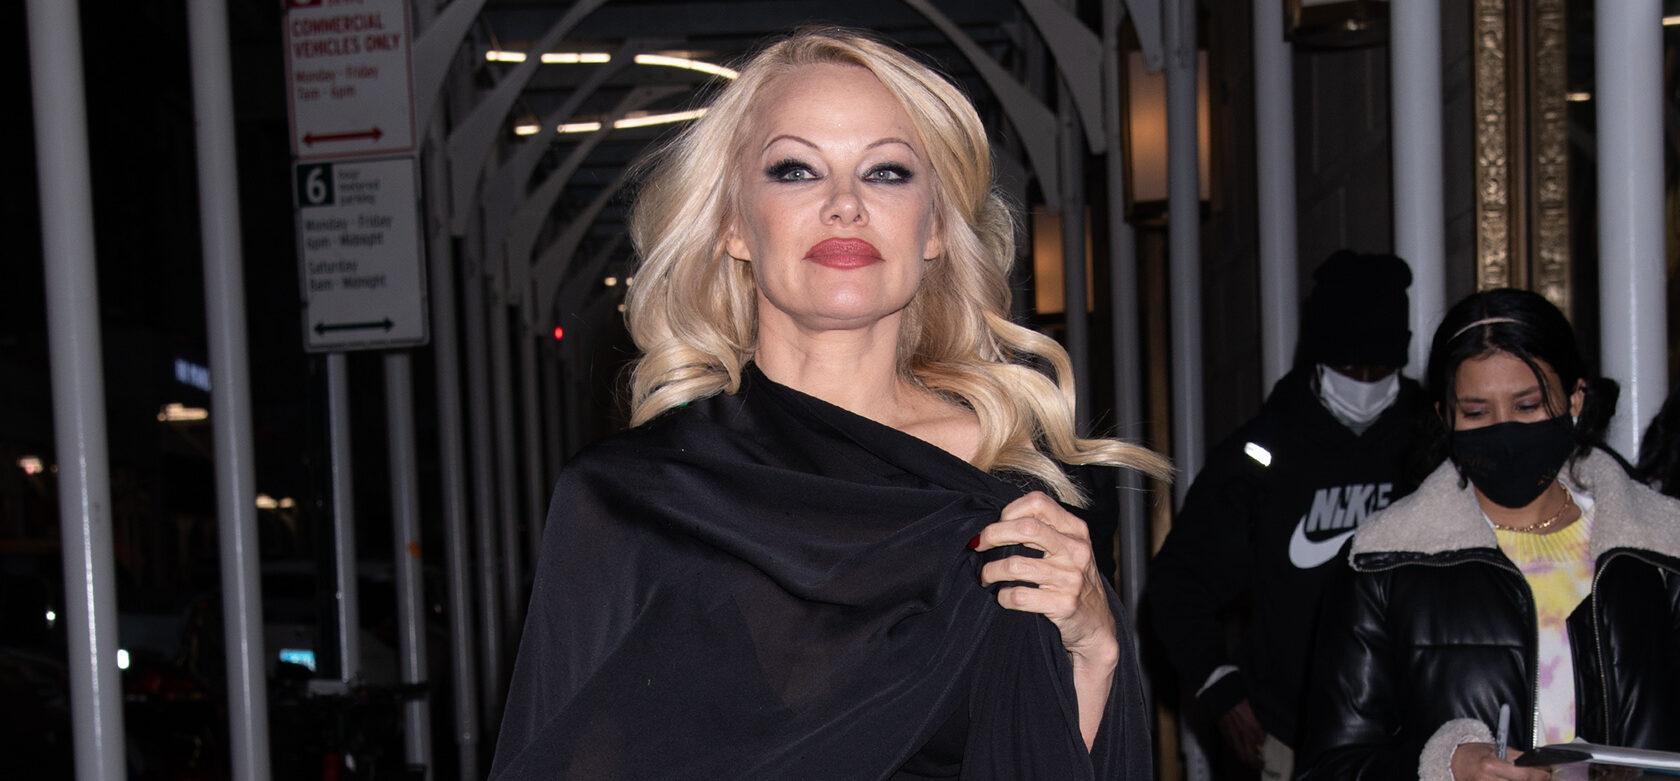 Pamela Anderson and Her Son Brandon Thomas Lee Head to Dinner in NYC